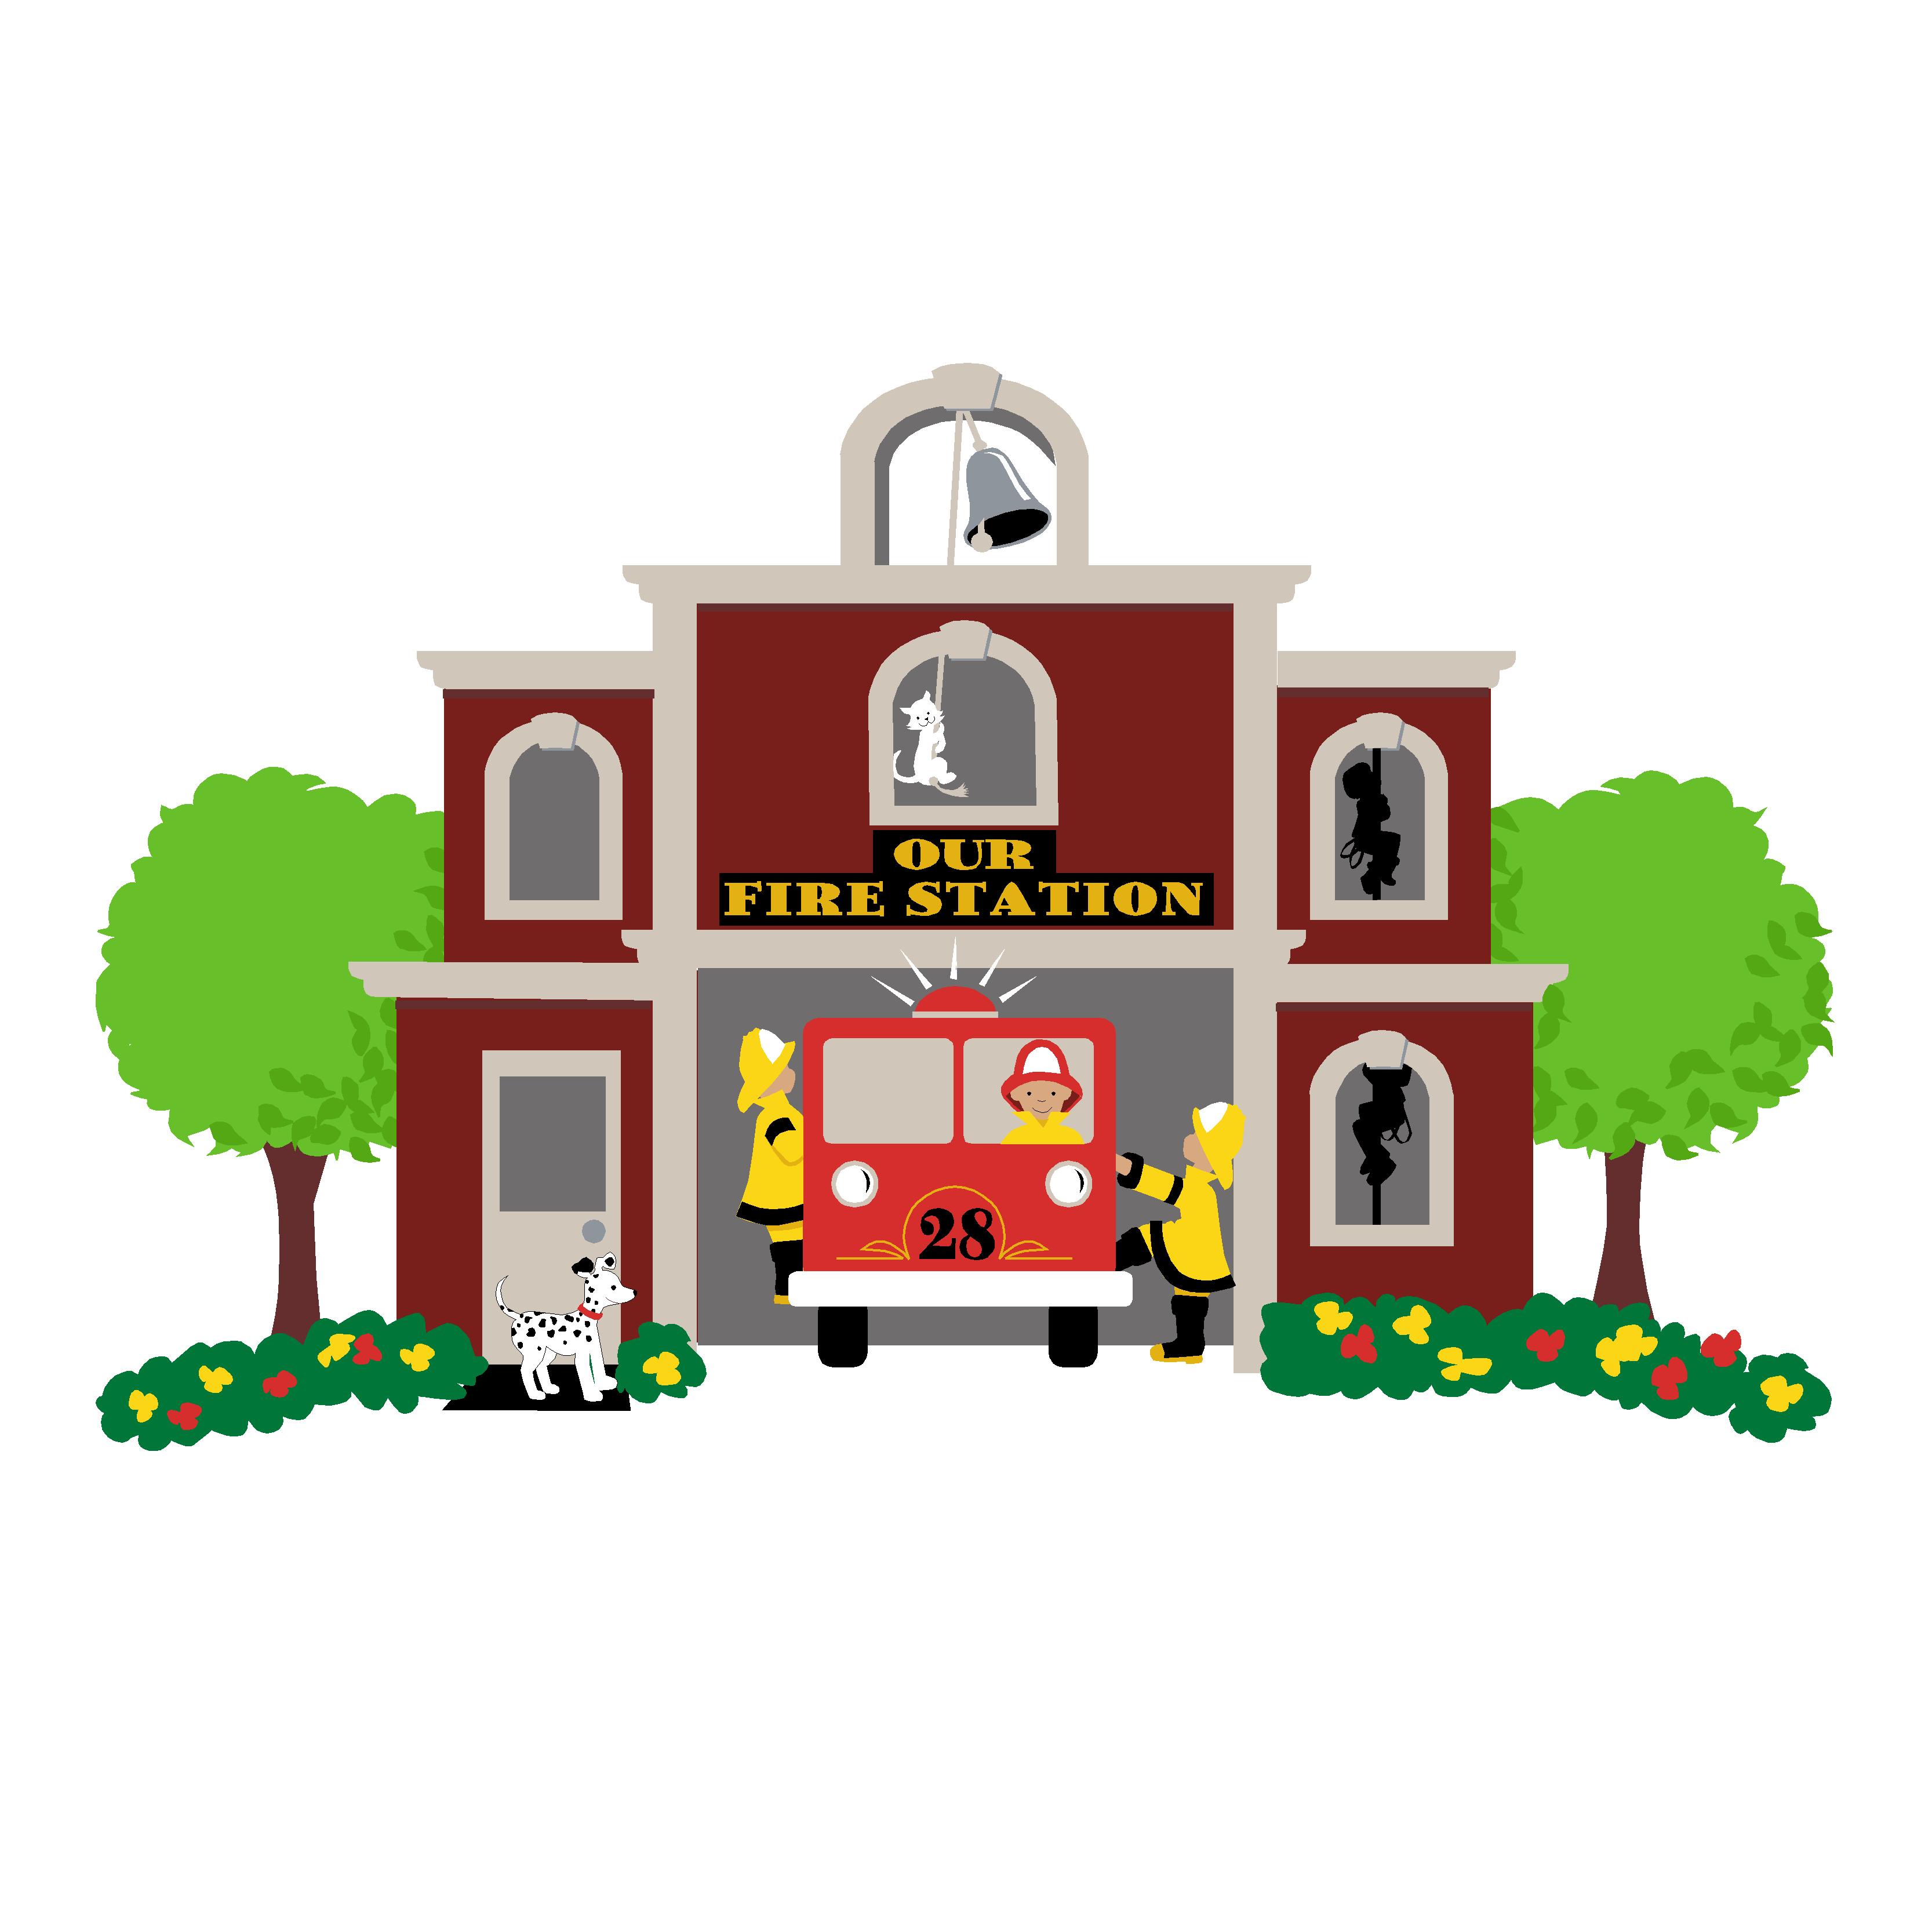 Fire Truck Backgrounds on Wal